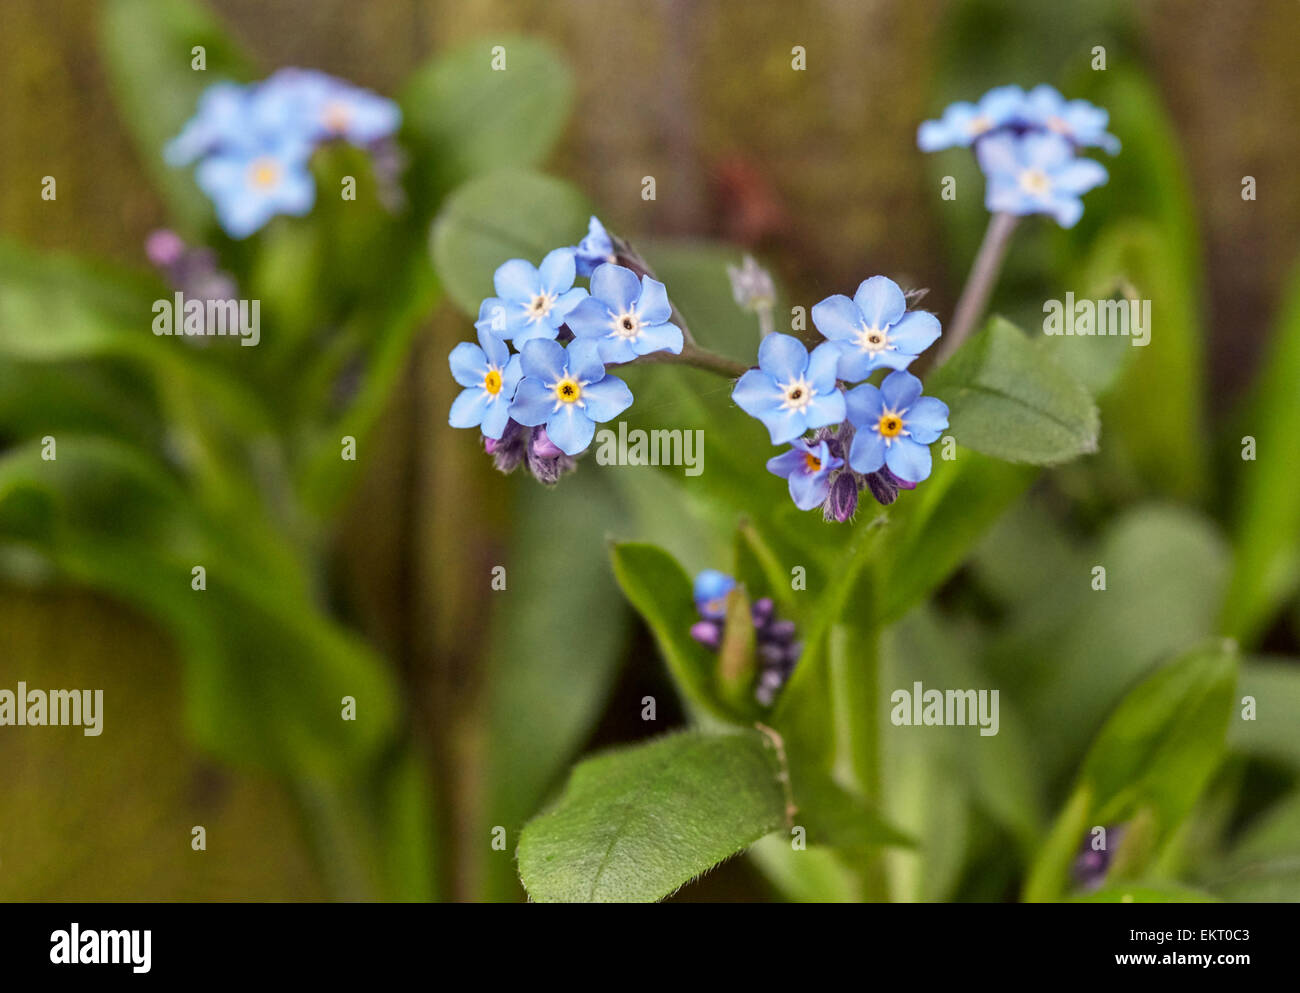 Forget-me-not flowering in spring. Hurst Meadows, West Molesey, Surrey, England. Stock Photo